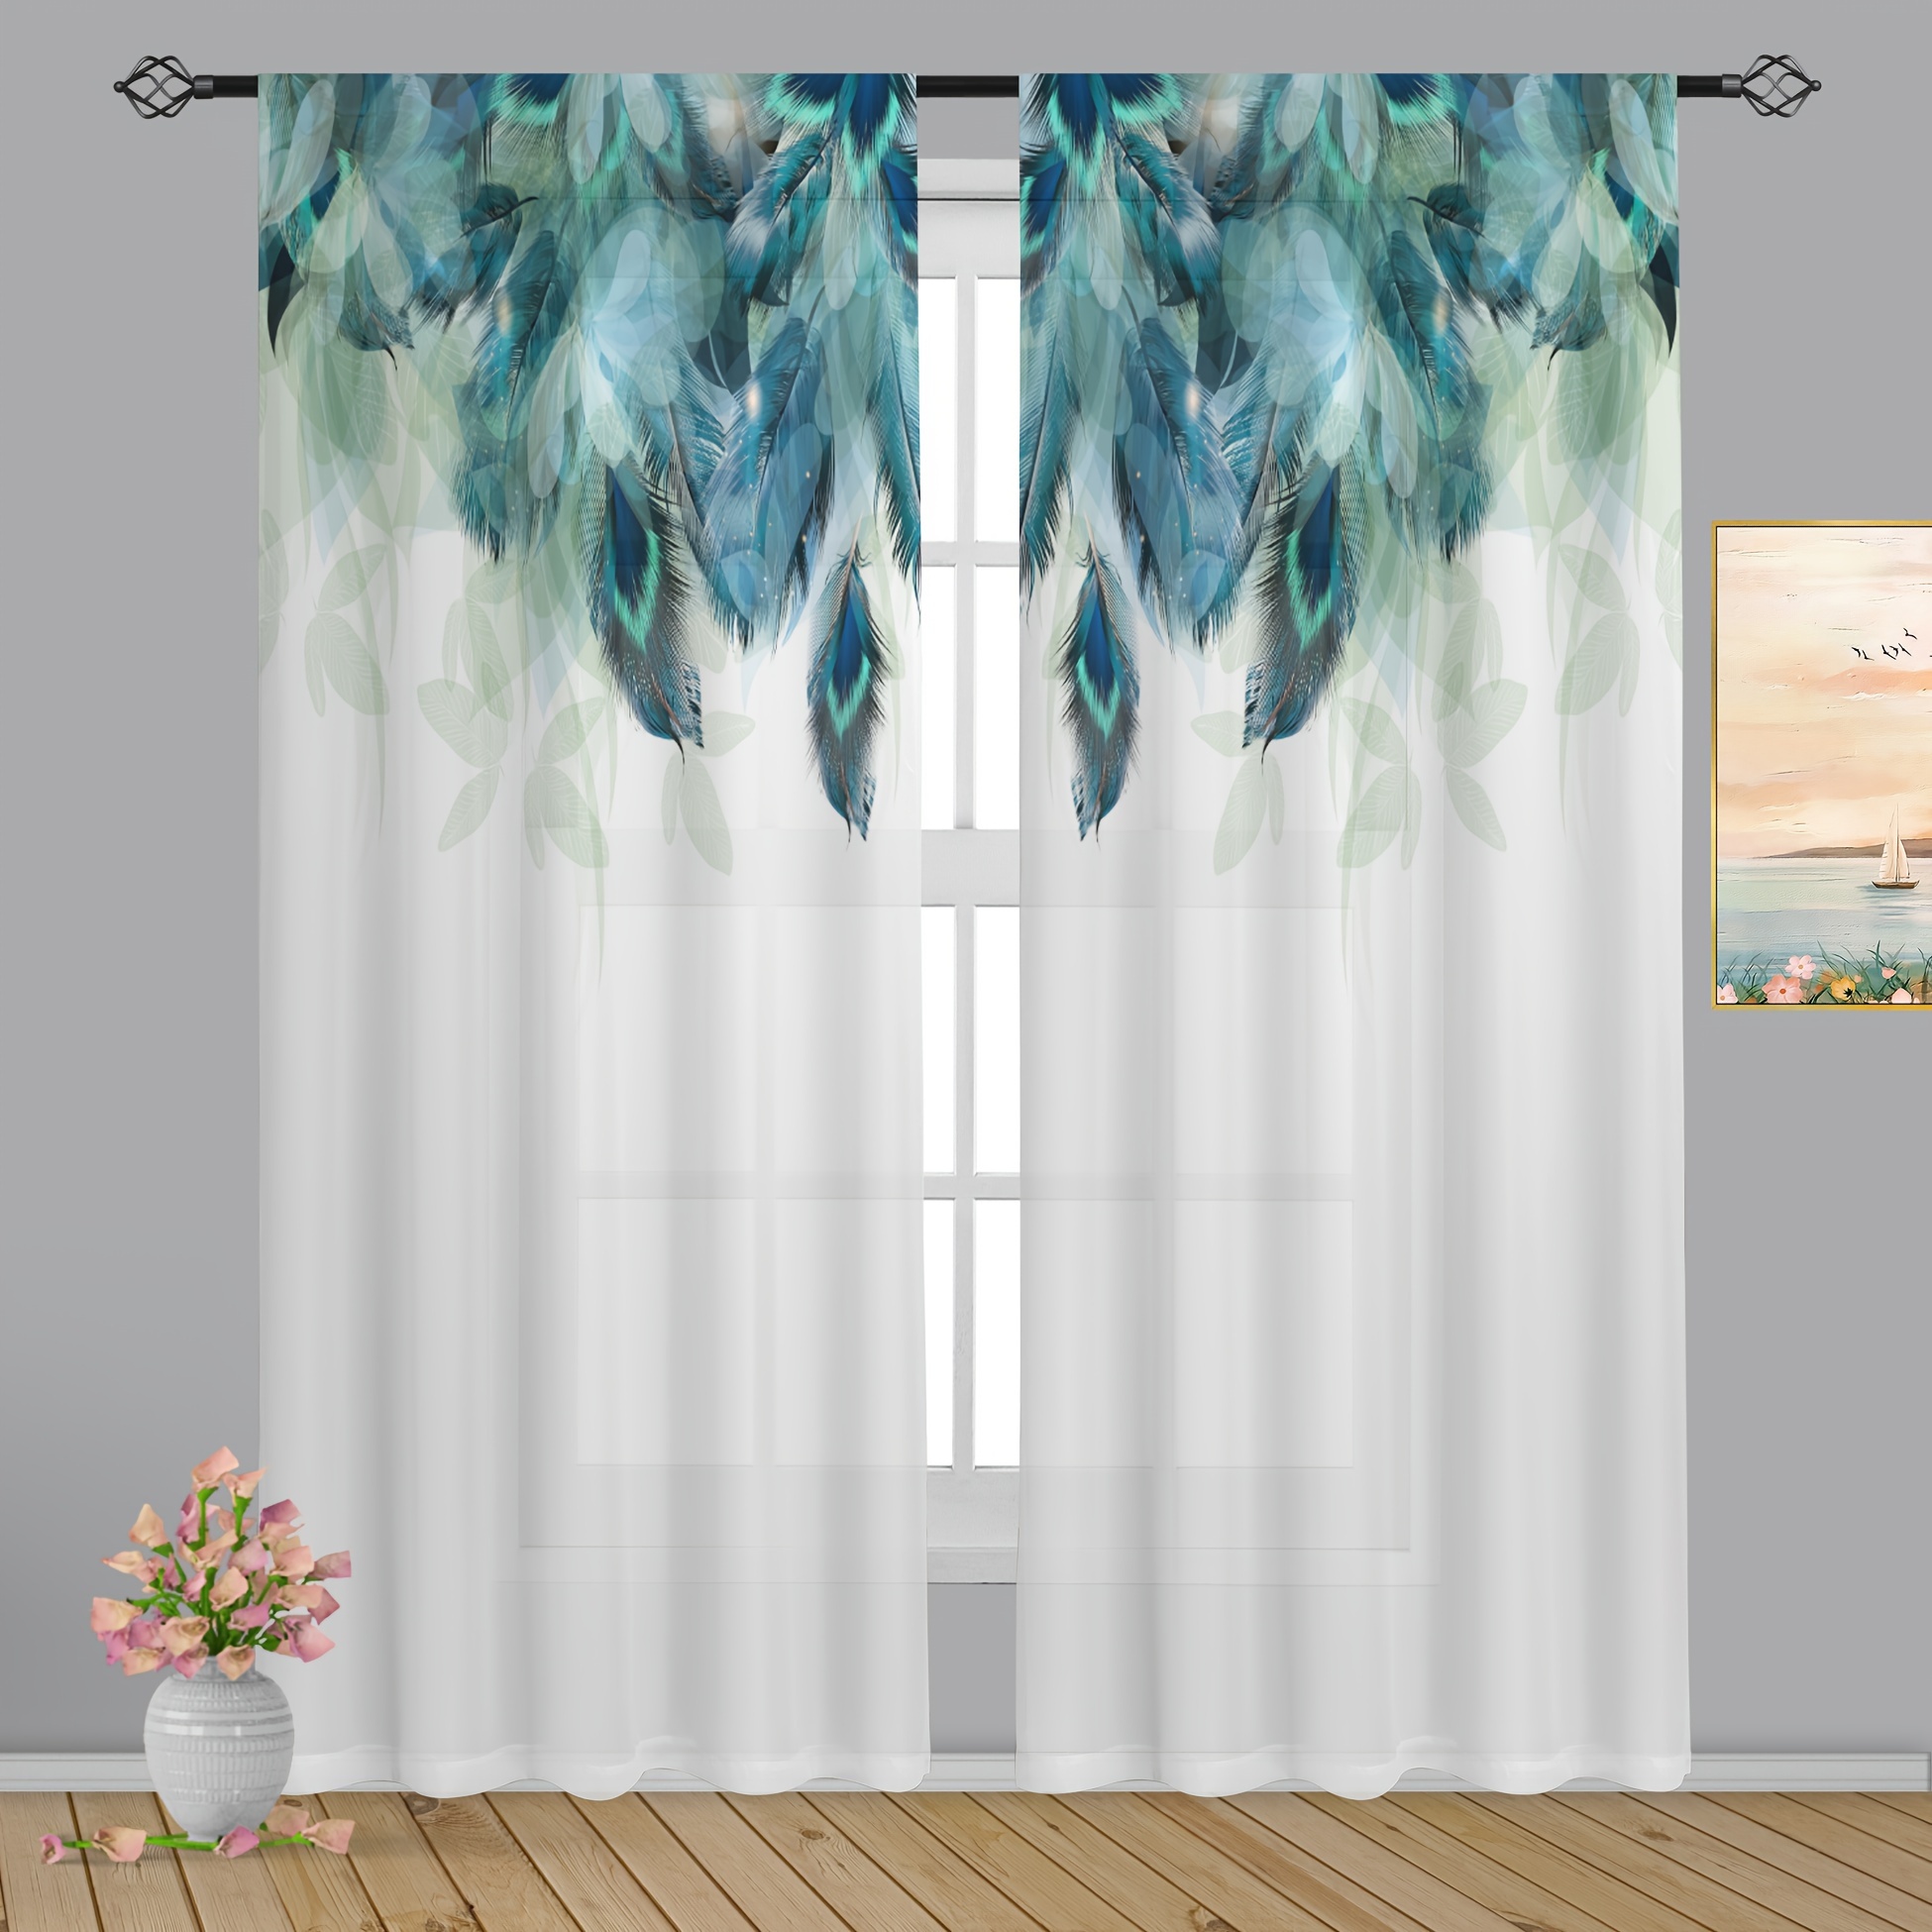 

2pcs, Green Feather Leaves Printed Translucent Curtains, Multi-scene Polyester Rod Pocket Decorative Curtains For Living Room Game Room Bedroom Home Decor Party Supplies